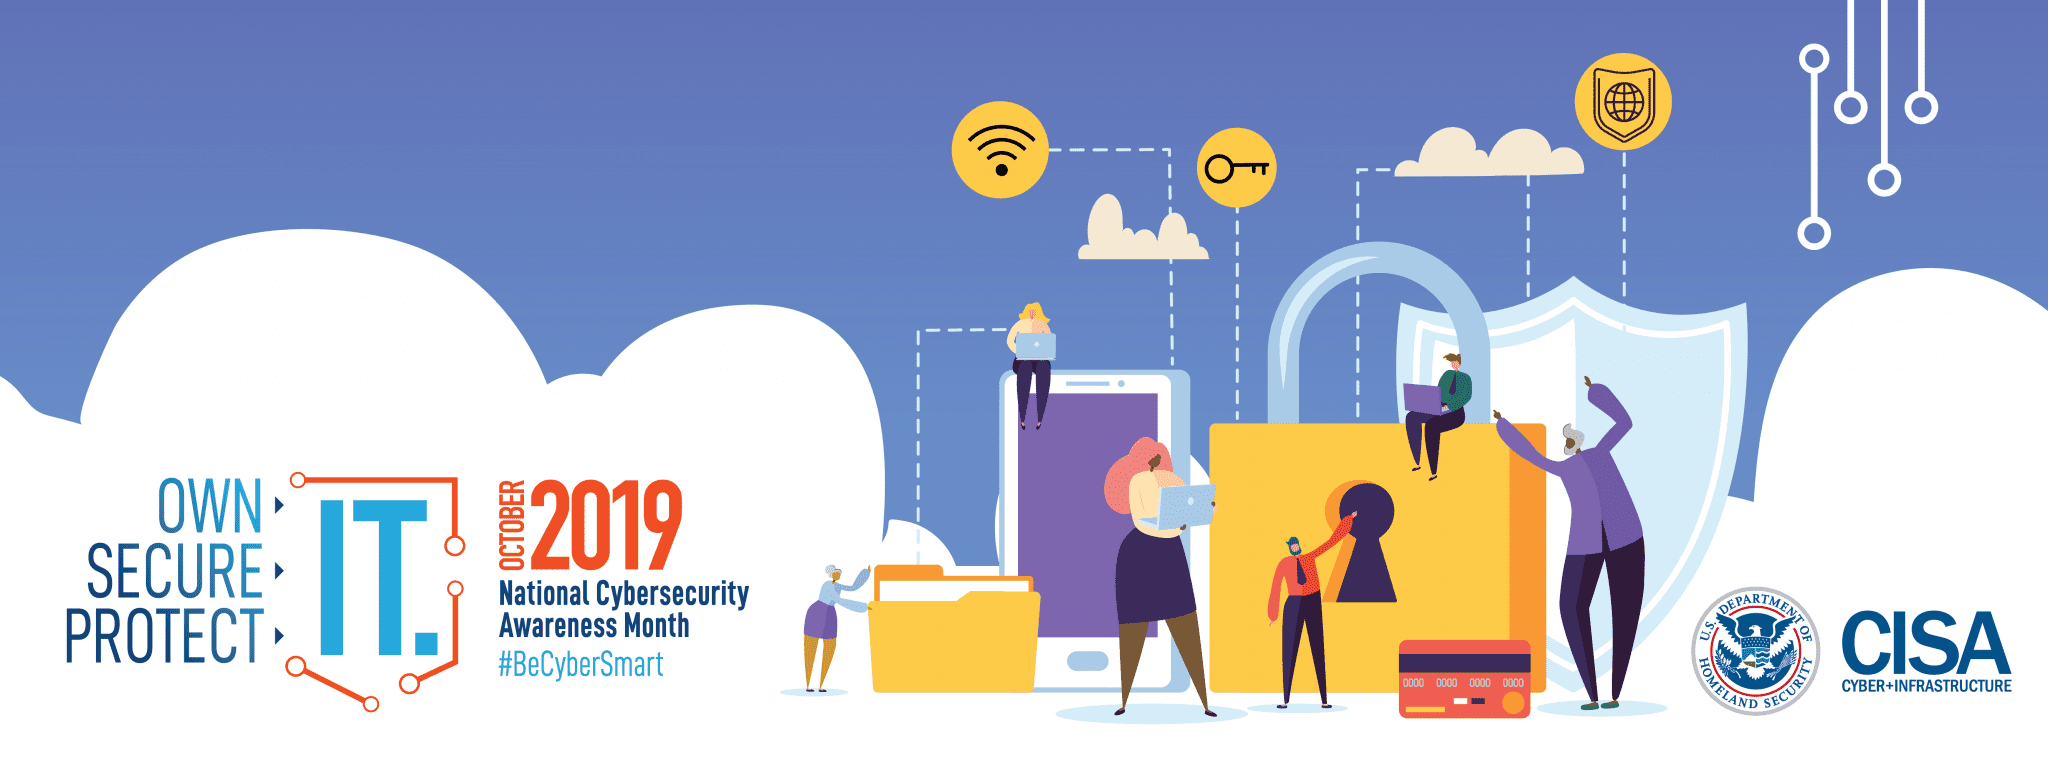 National Cybersecurity Awareness Month 2019 banner 